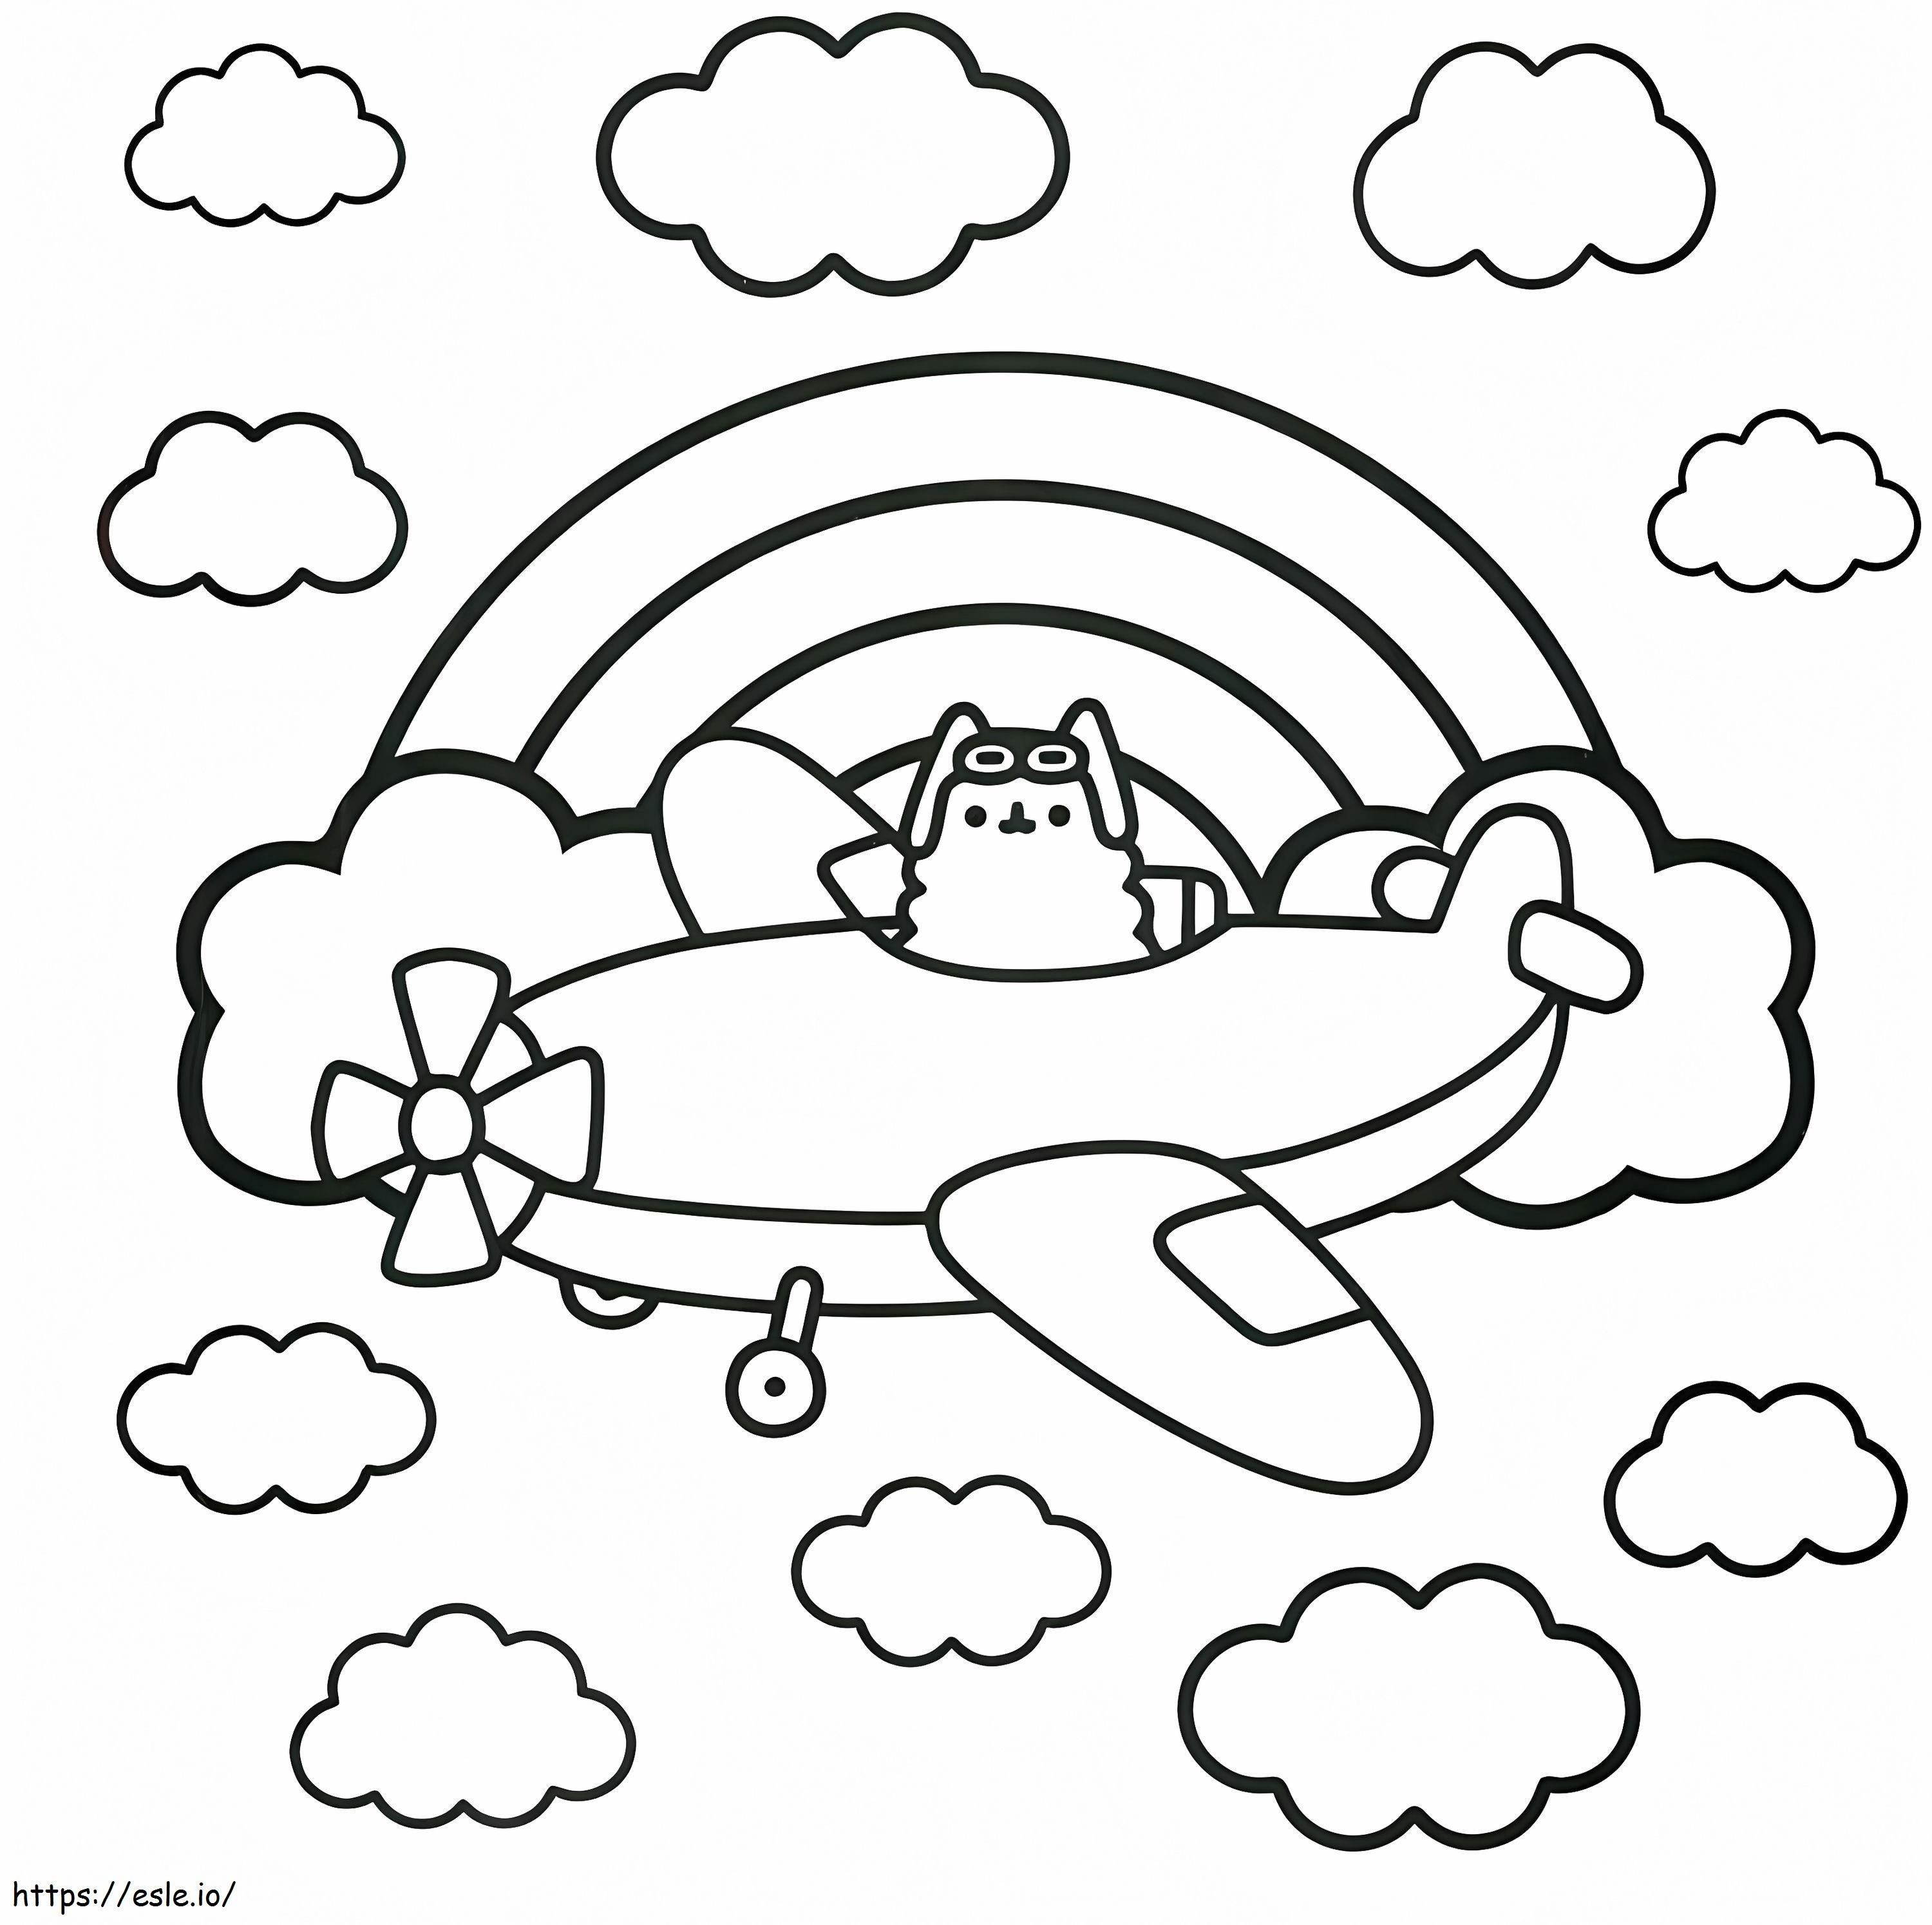 Adorable Pusheen 3 coloring page